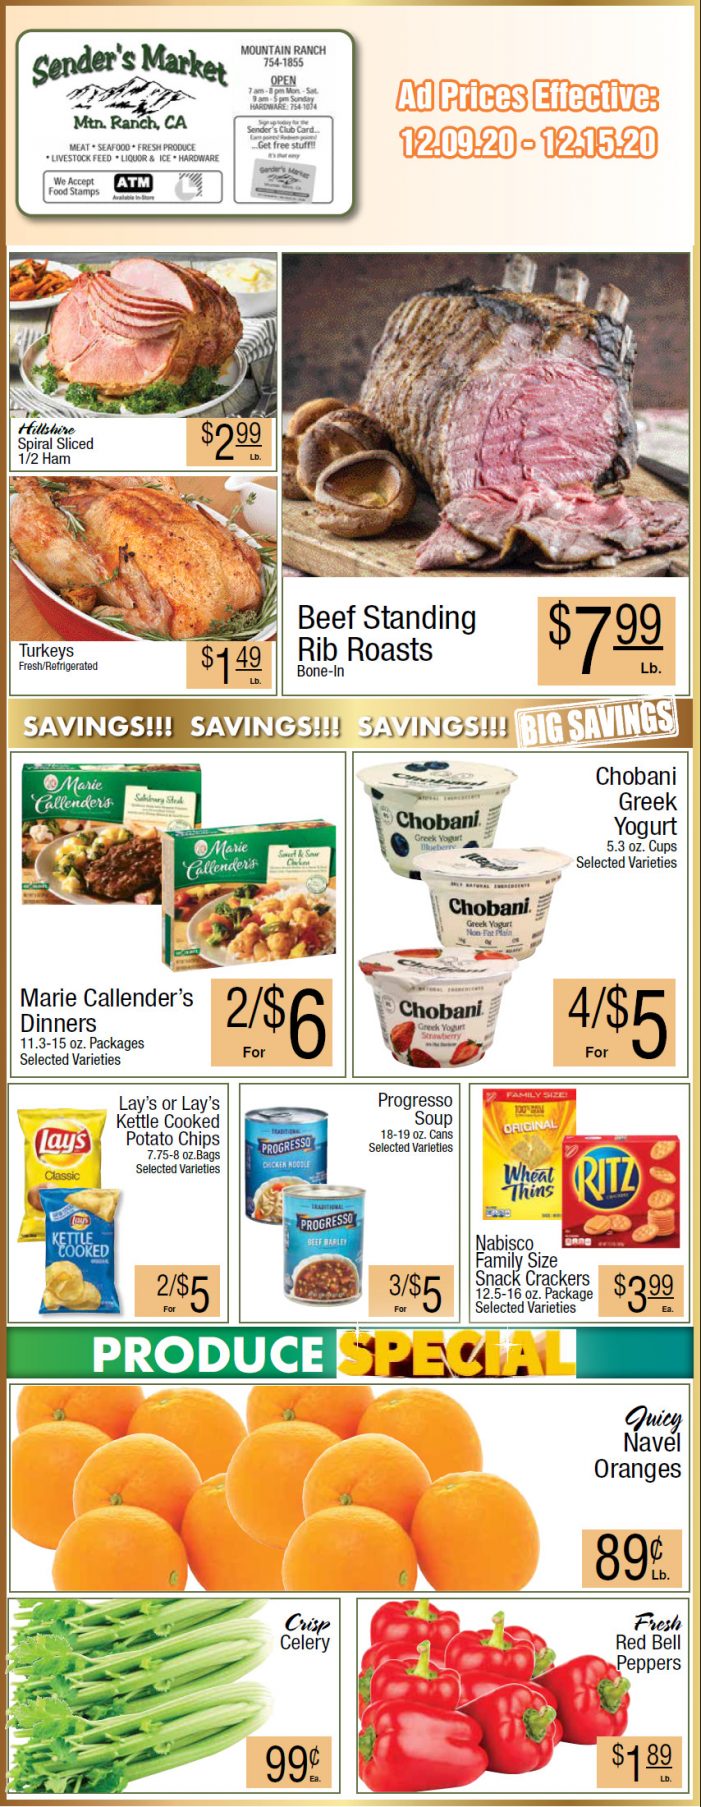 Sender’s Market’s Weekly Ad & Grocery Specials Through December 15th!  Shop Local & Save!